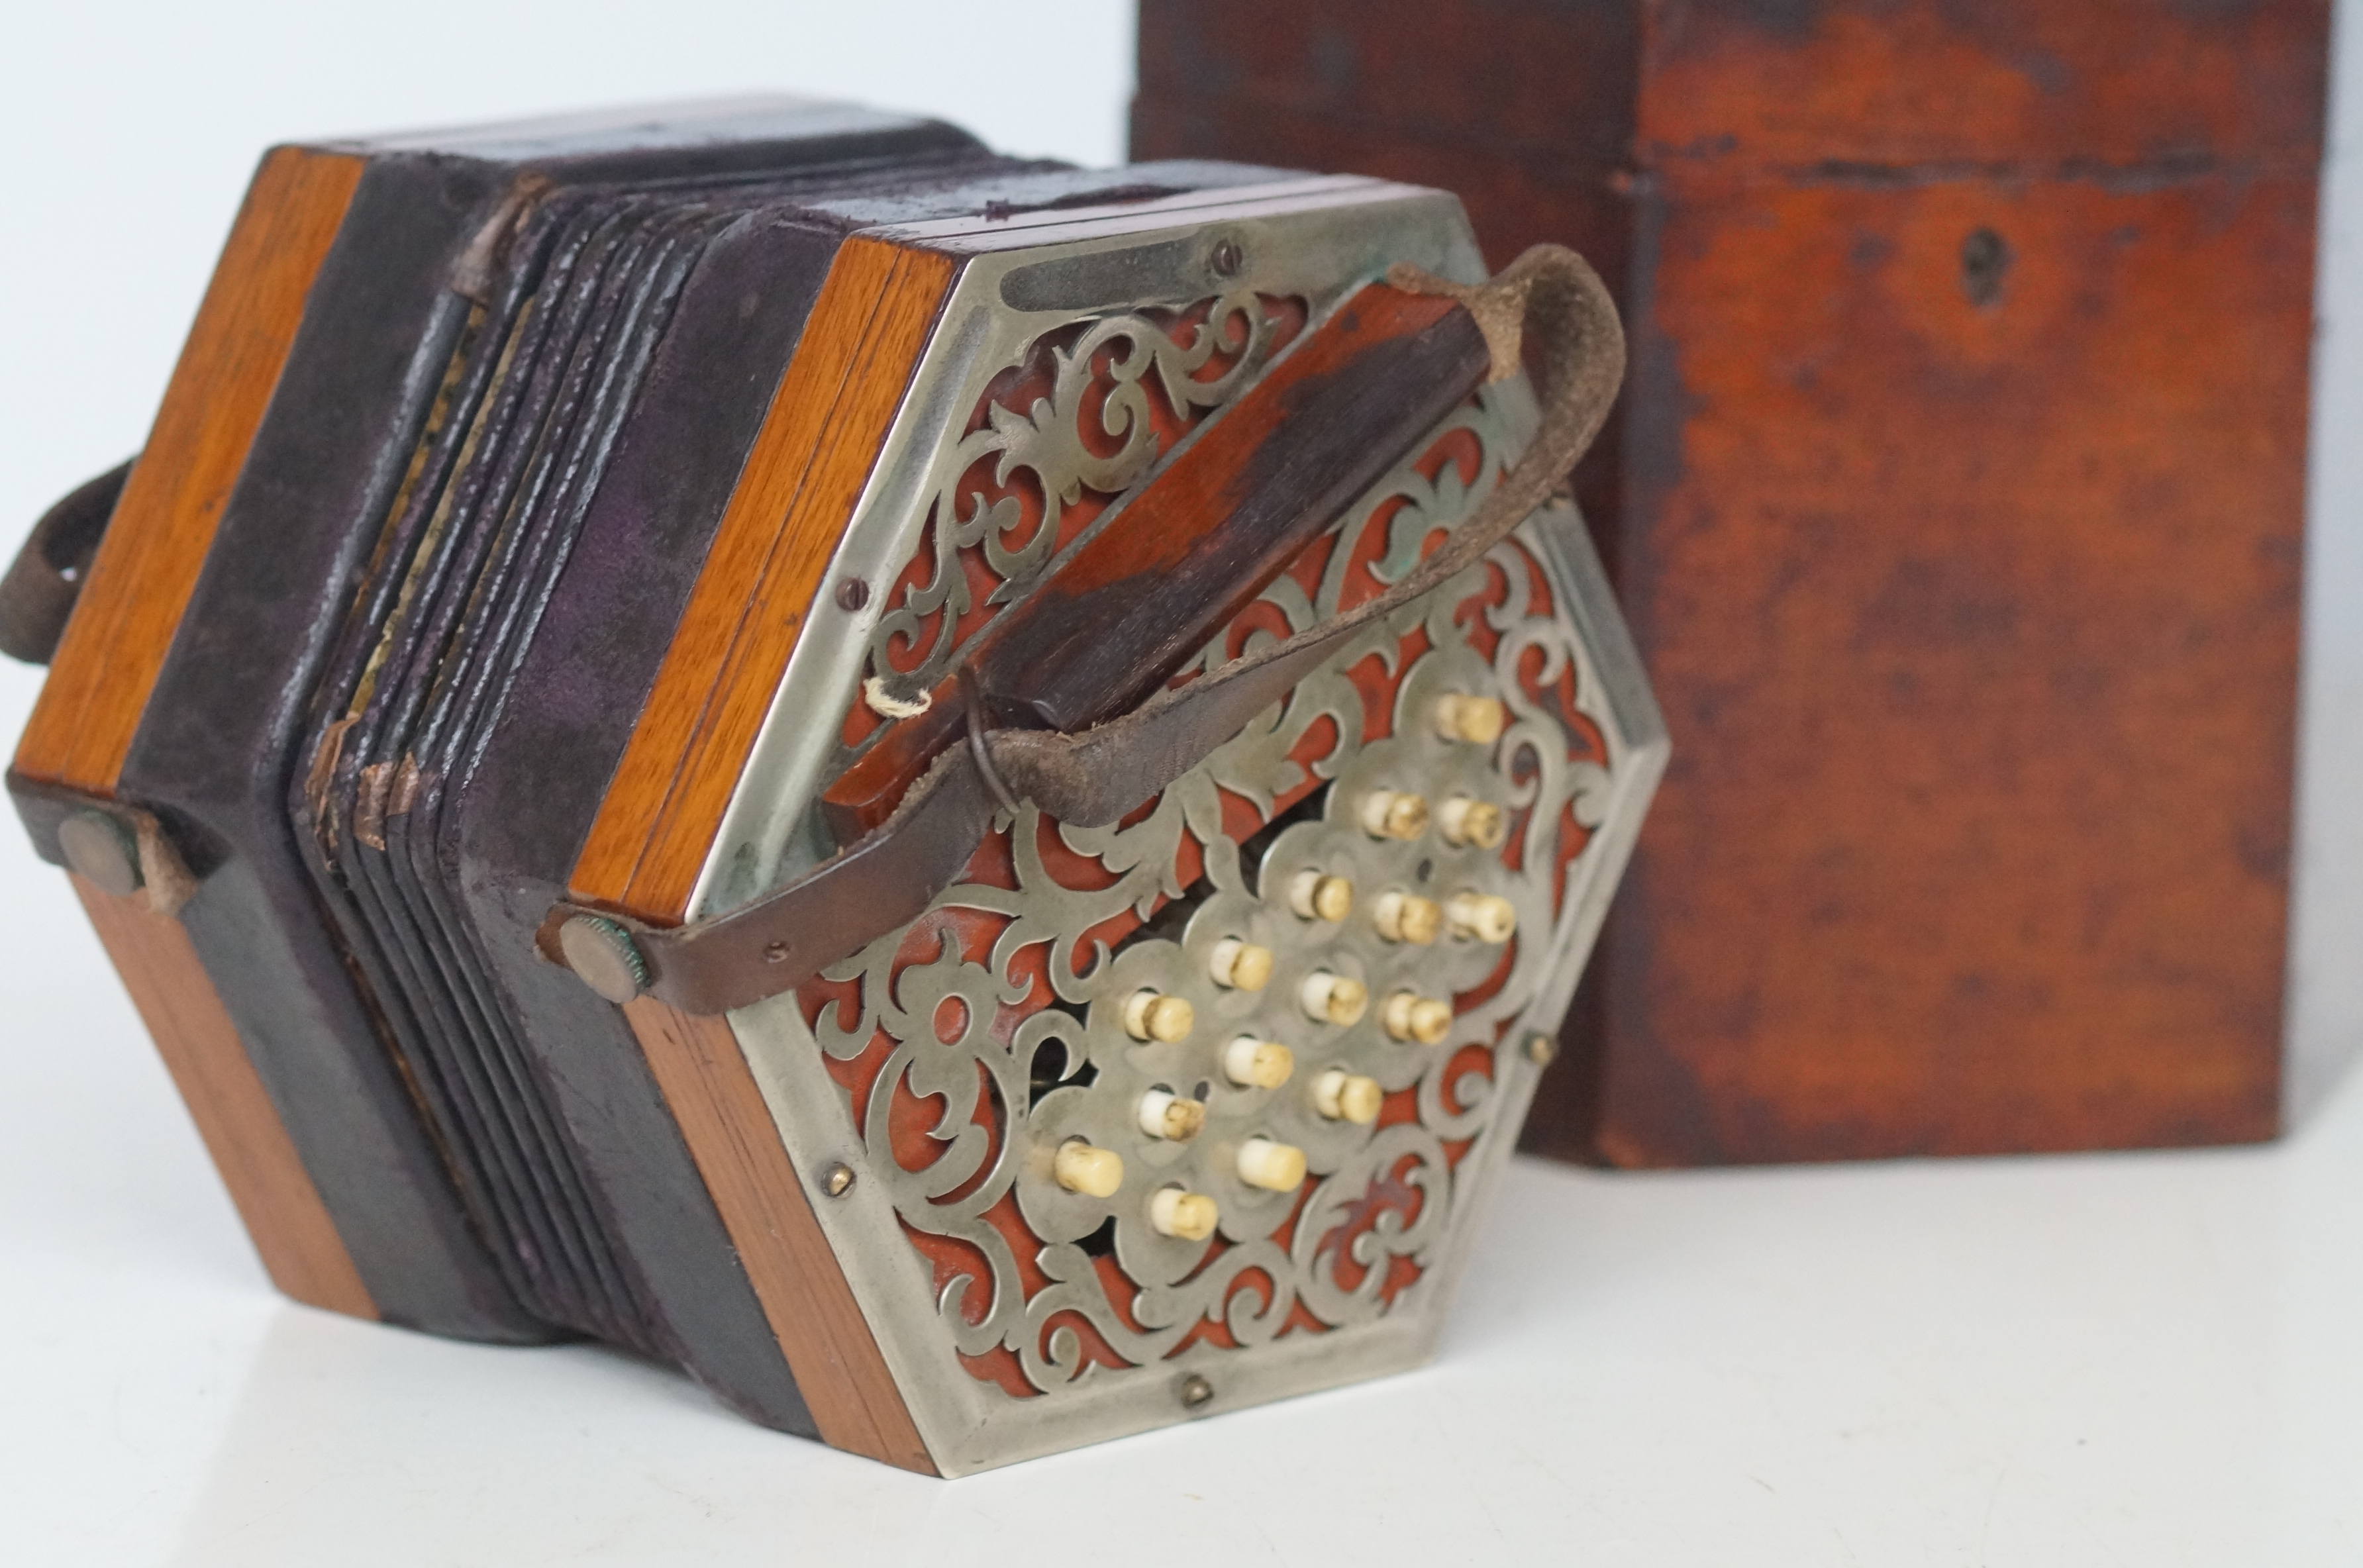 33 Button cased concertina, in need of some restor